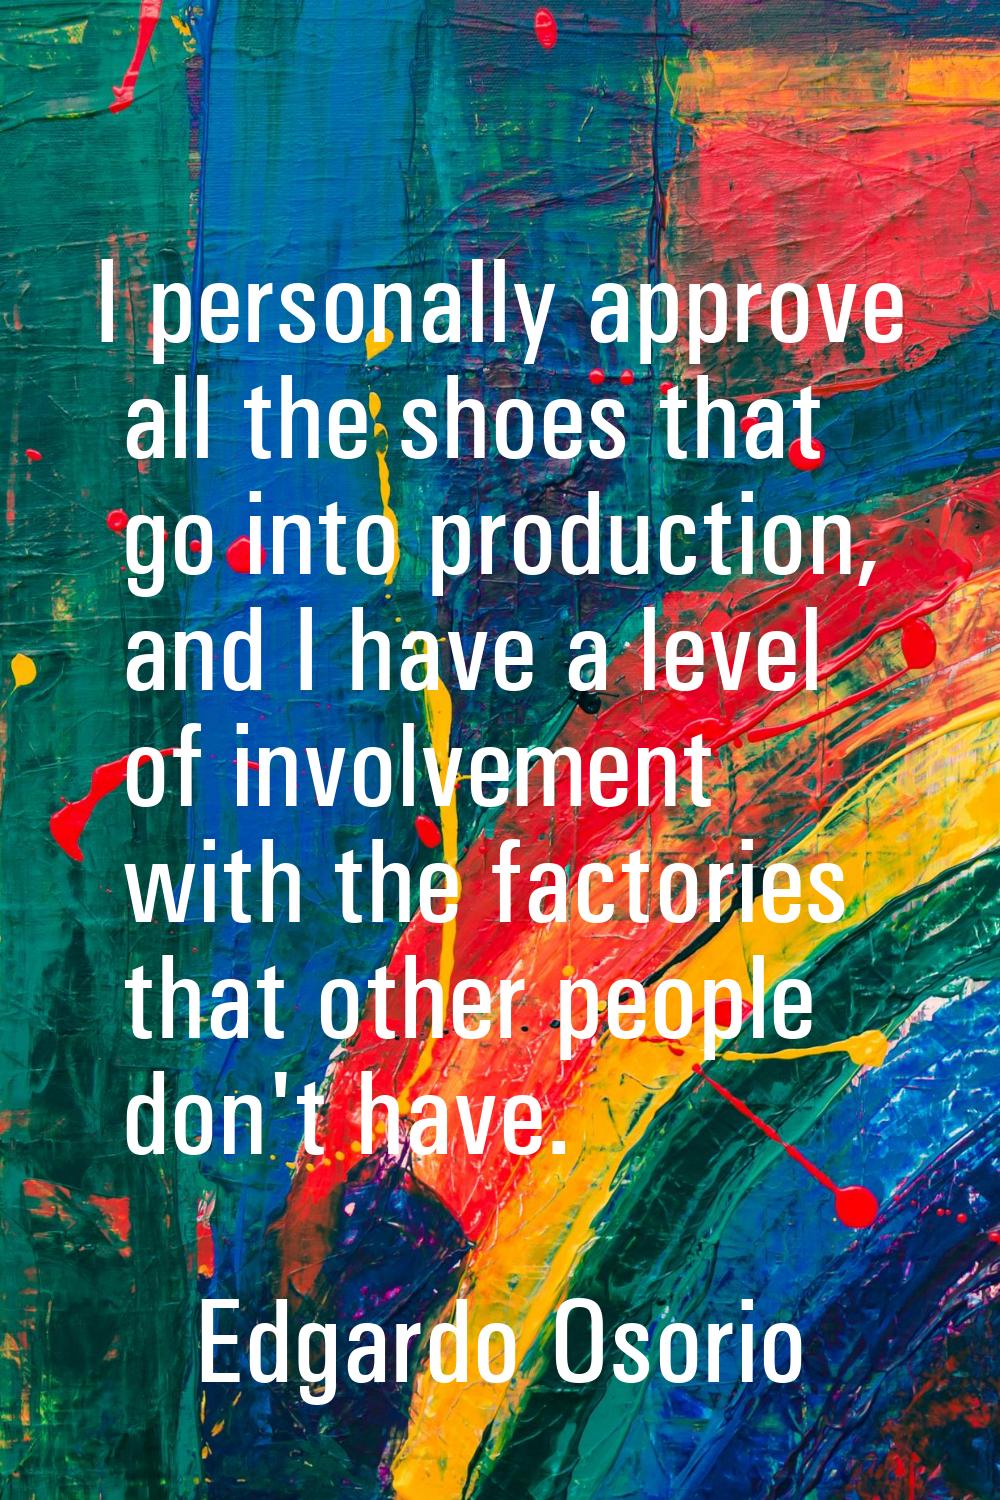 I personally approve all the shoes that go into production, and I have a level of involvement with 